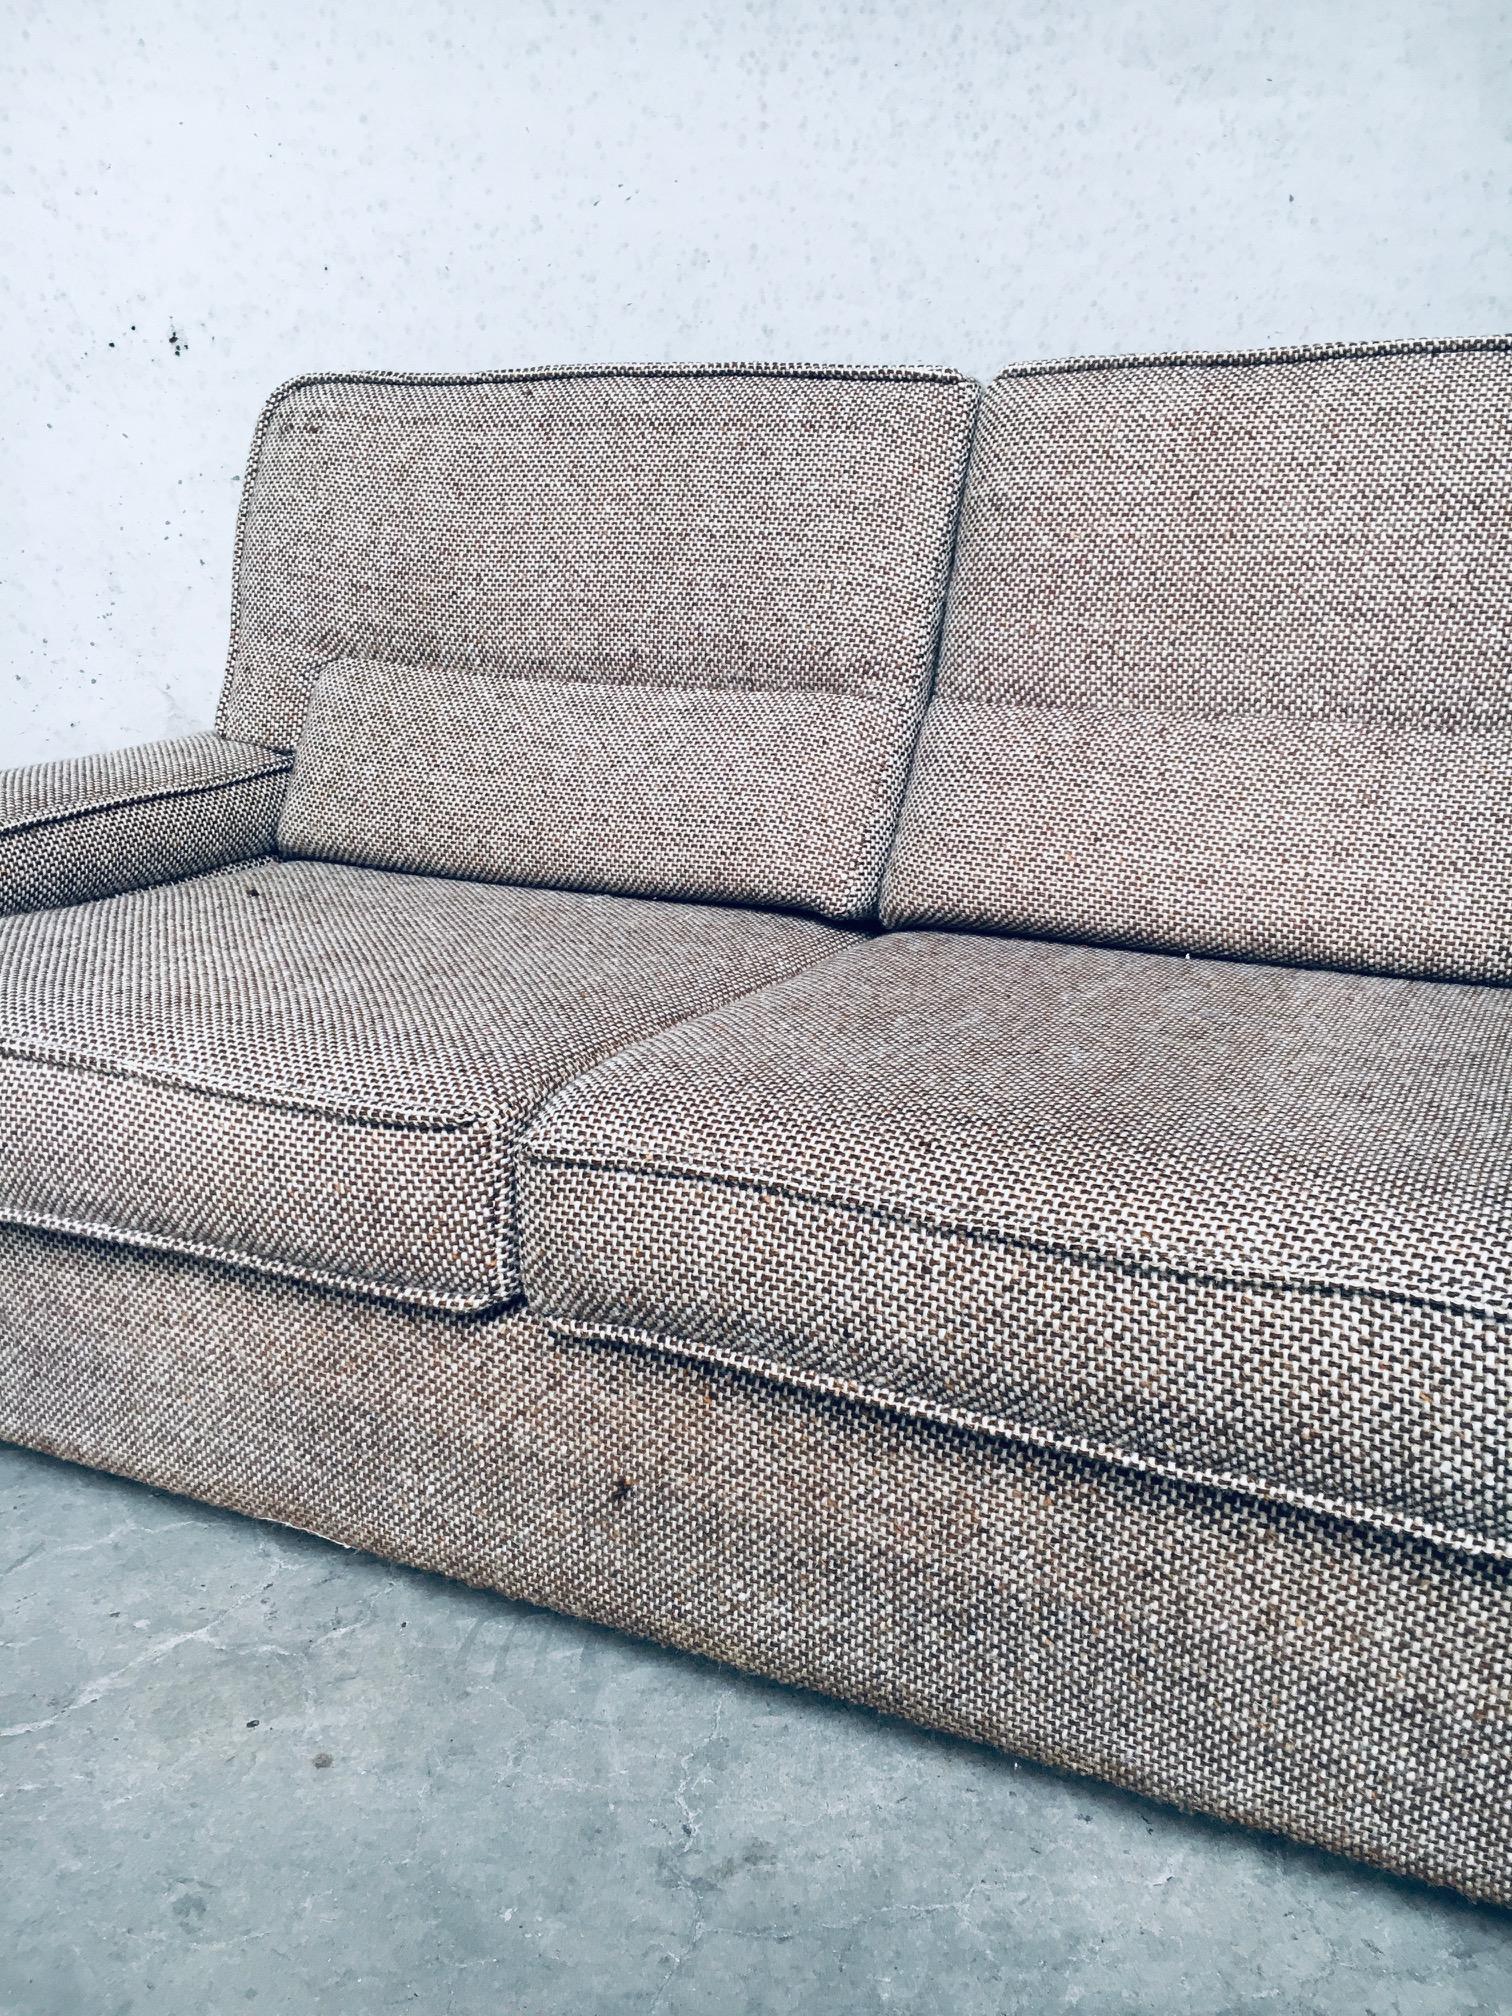 Midcentury Modern Design Boucle 3 Seat Sofa, Italy 1970's For Sale 9